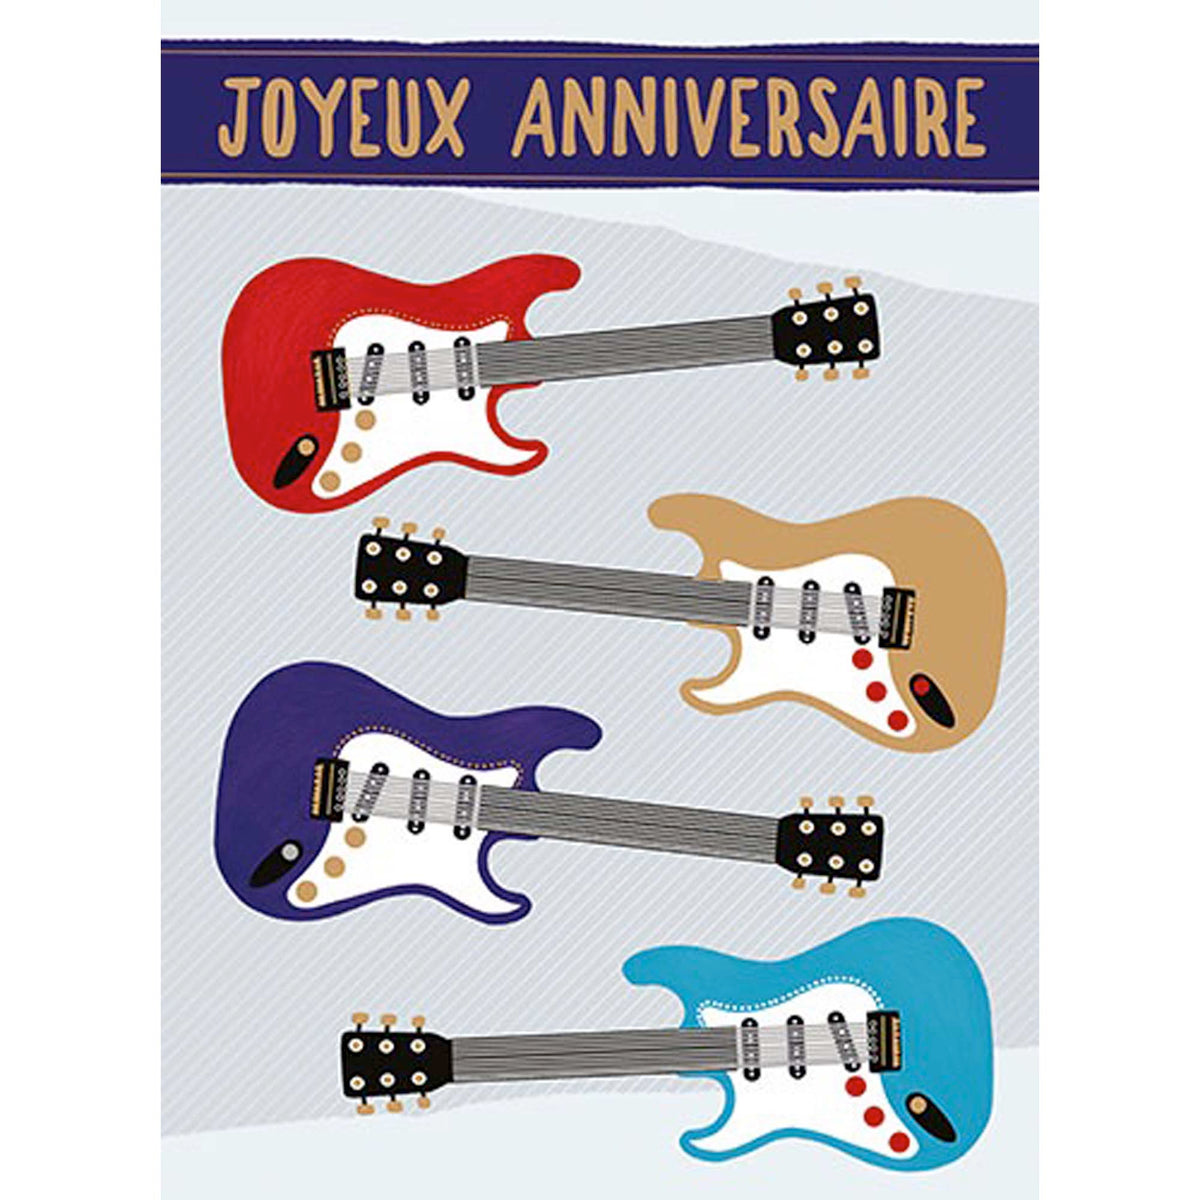 DISTRIBUTION INCOGNITO Greeting Cards Giant Birthday Card, "Joyeux Anniversaire" Electric Guitars, 1 Count